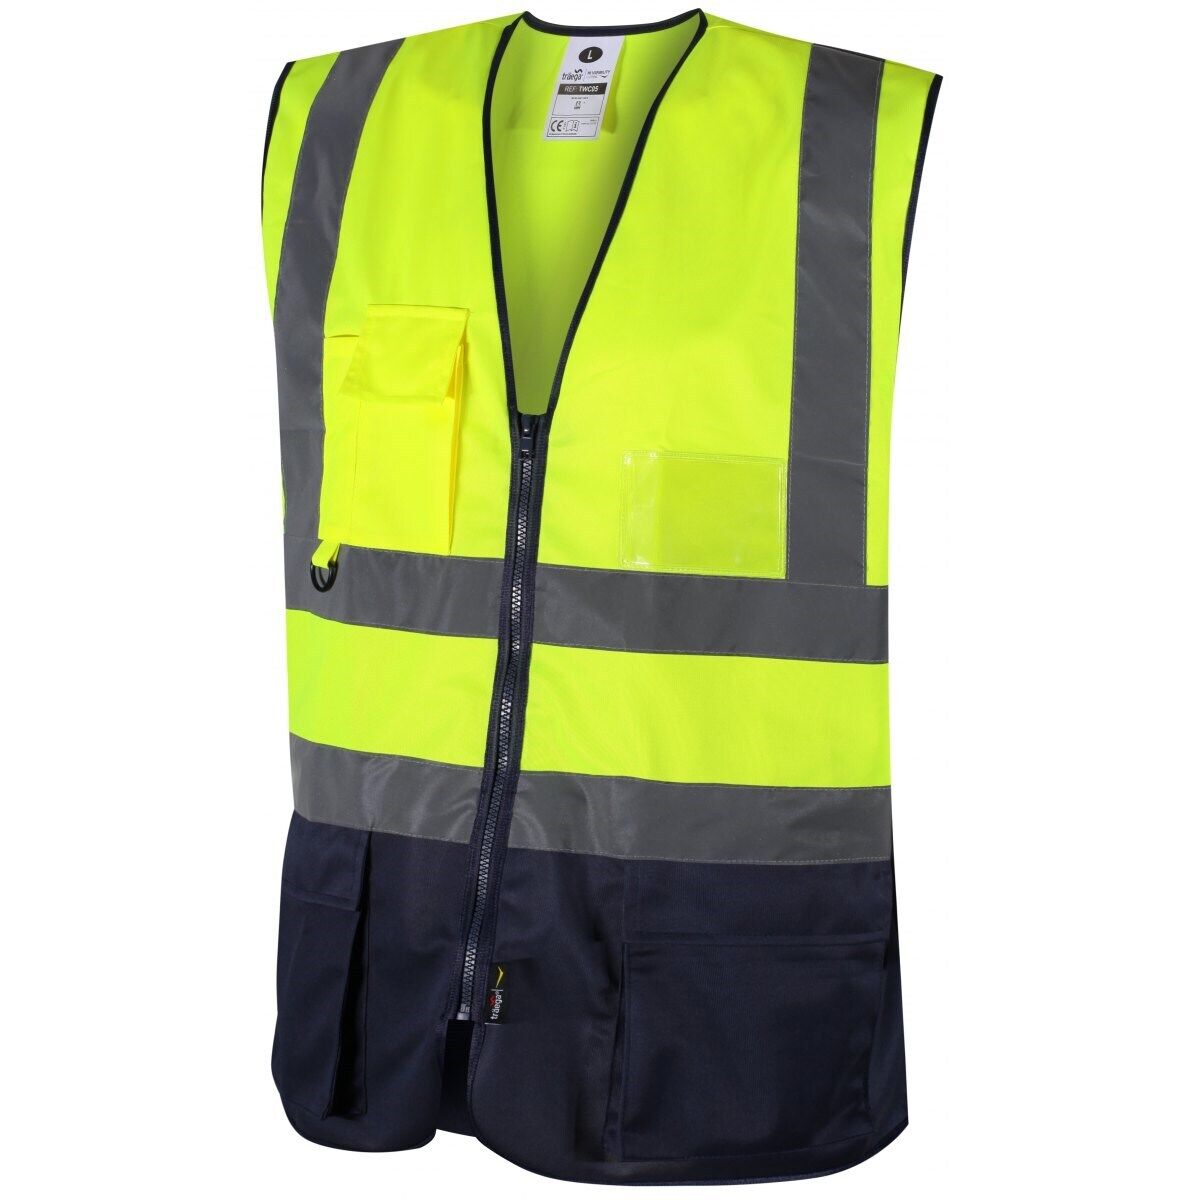 EXECUTIVE HI VIS VISIBILITY CONTRAST ID HOLDER WORK SAFETY MOTORCYCLE VEST WAISTCOAT